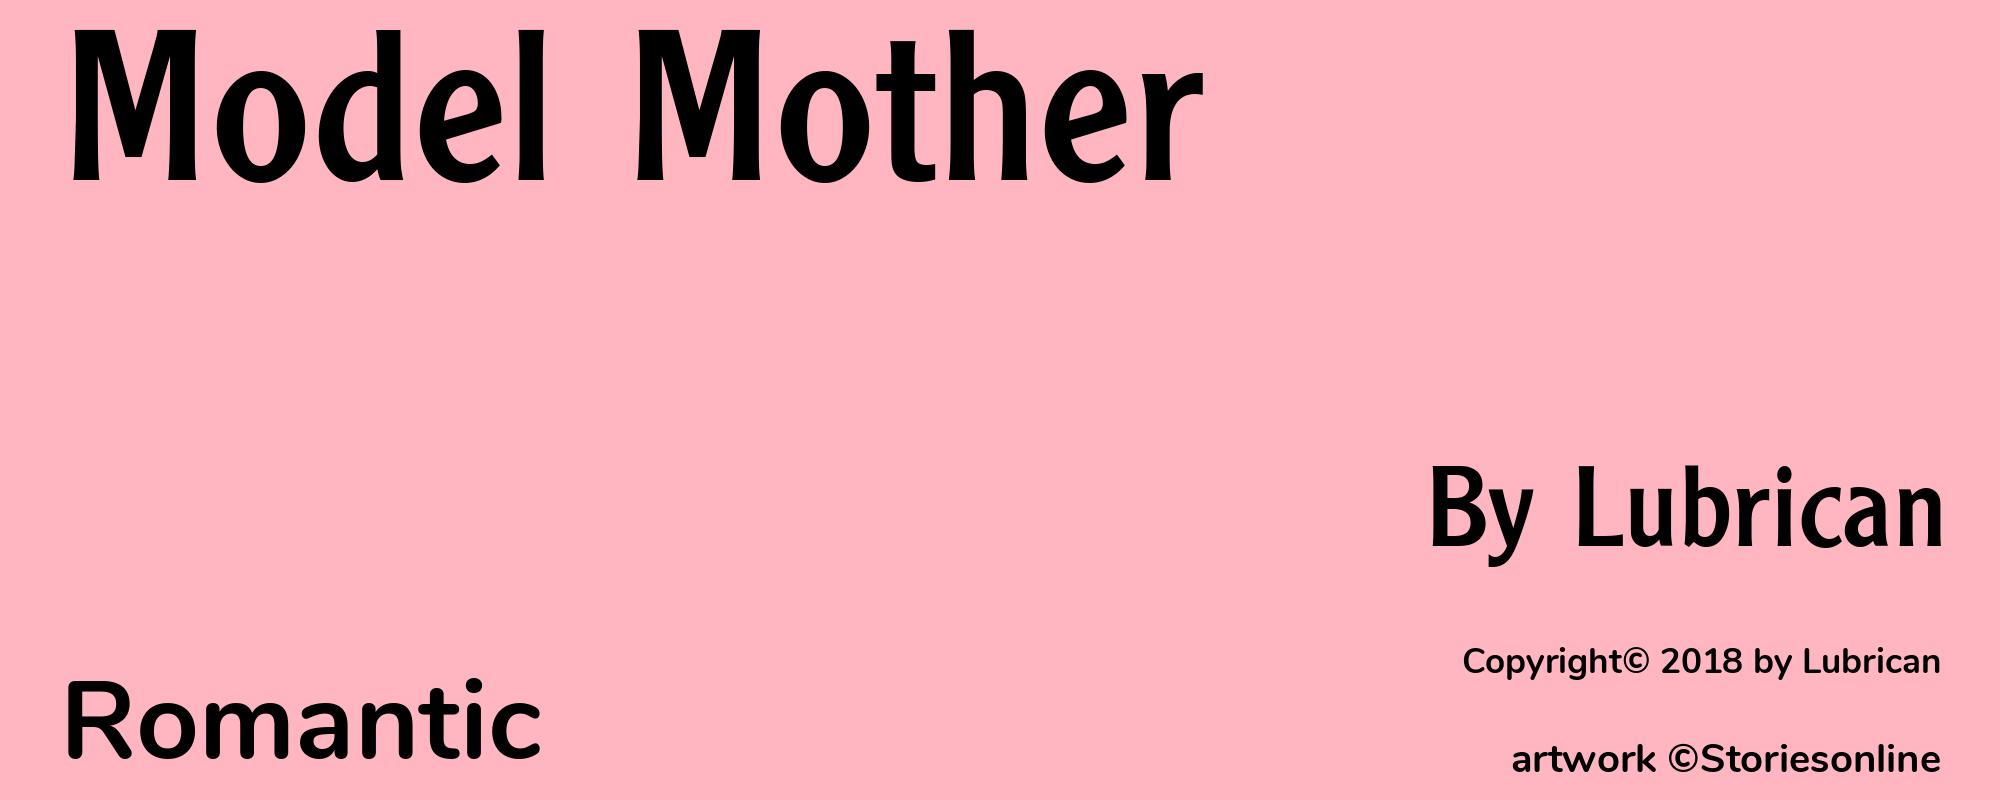 Model Mother - Cover